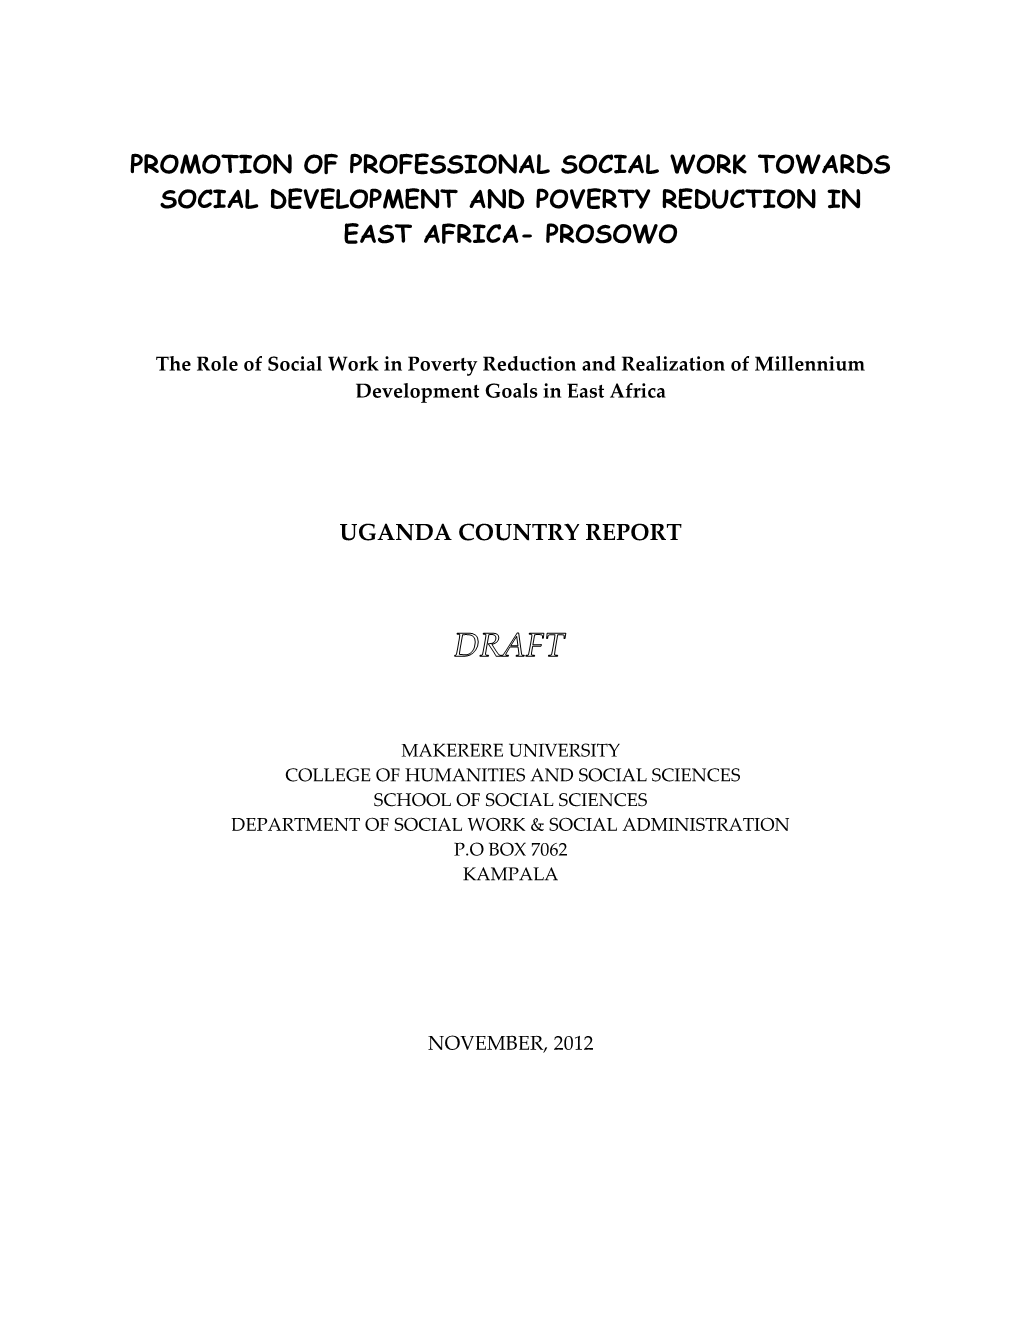 Promotion of Professional Social Work Towards Social Development and Poverty Reduction